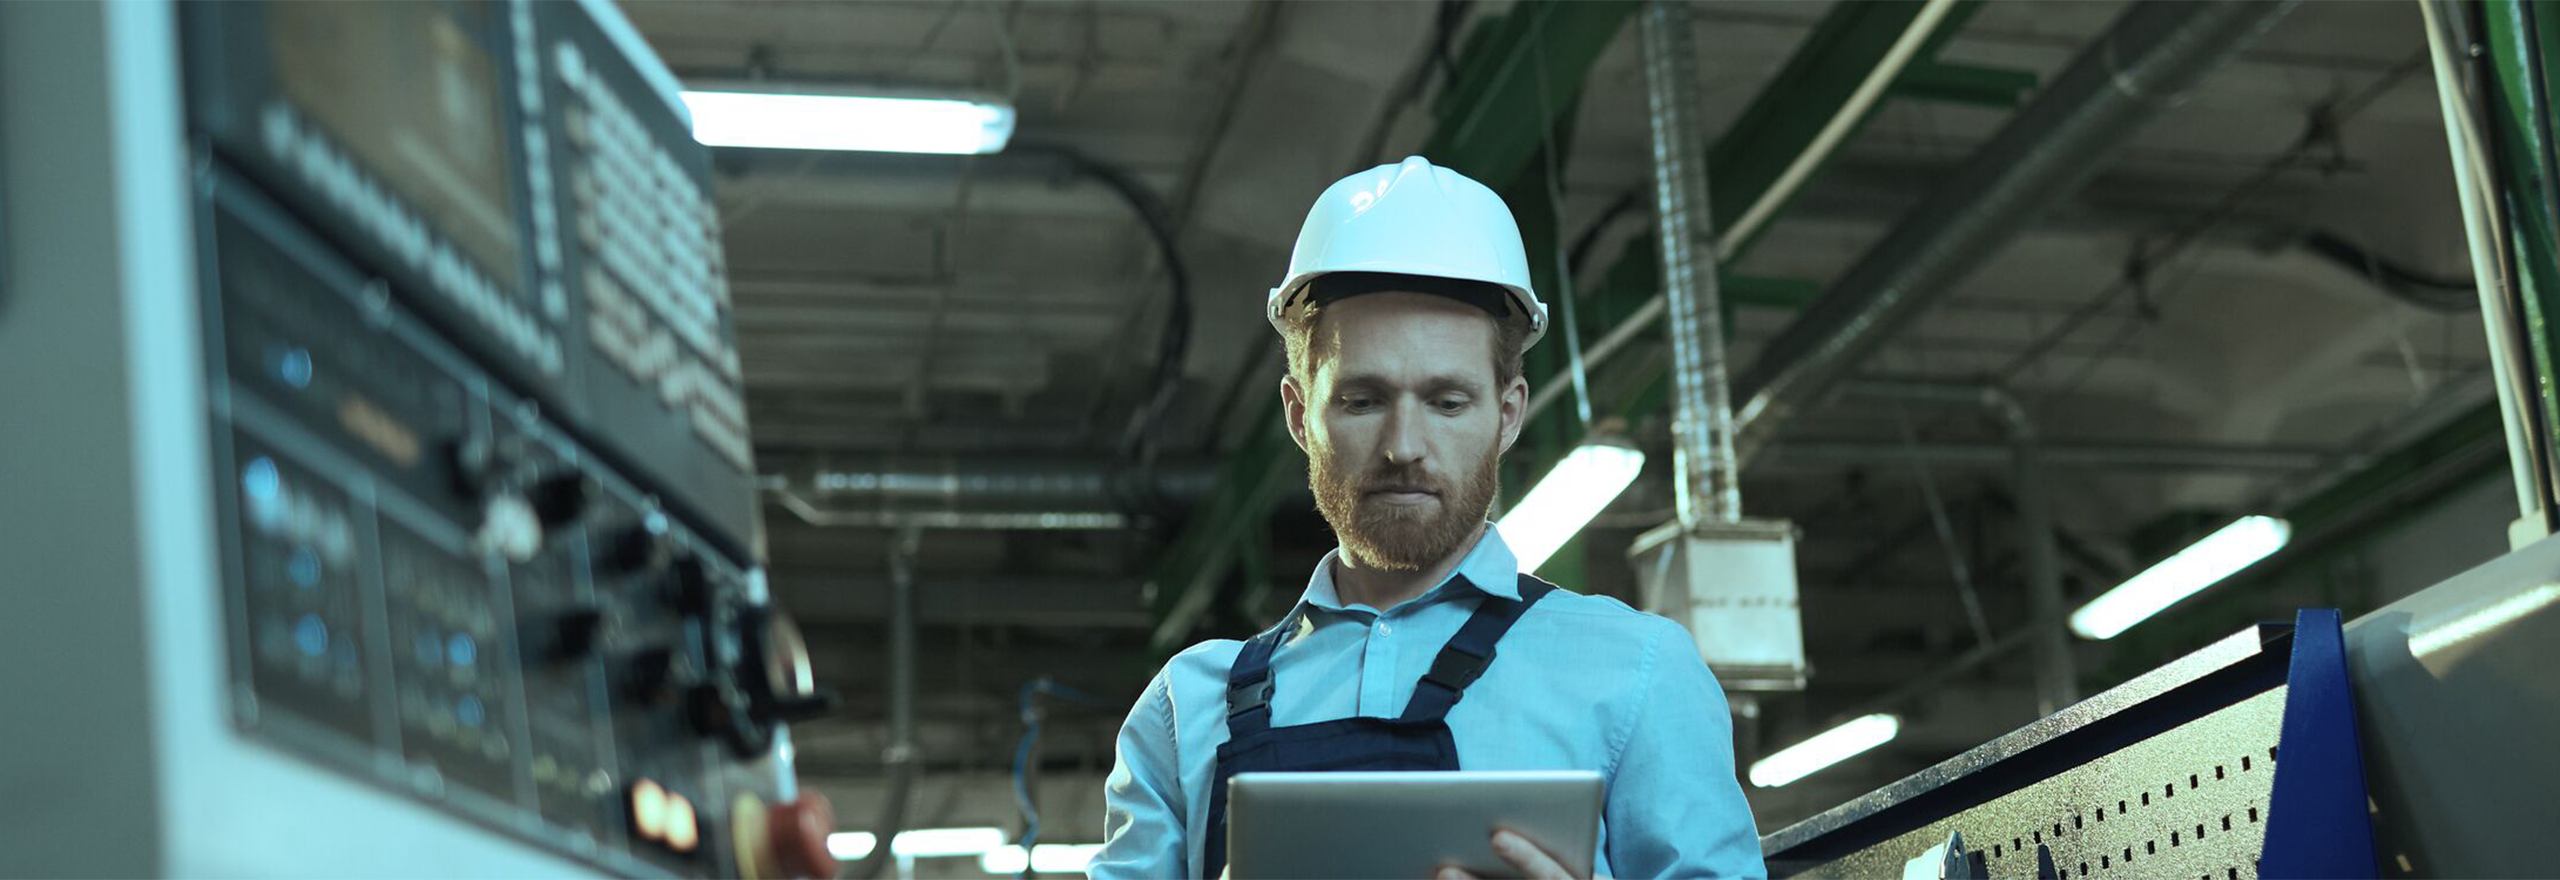 Manufacturing worker using a tablet to add notes and details about a machine downtime event